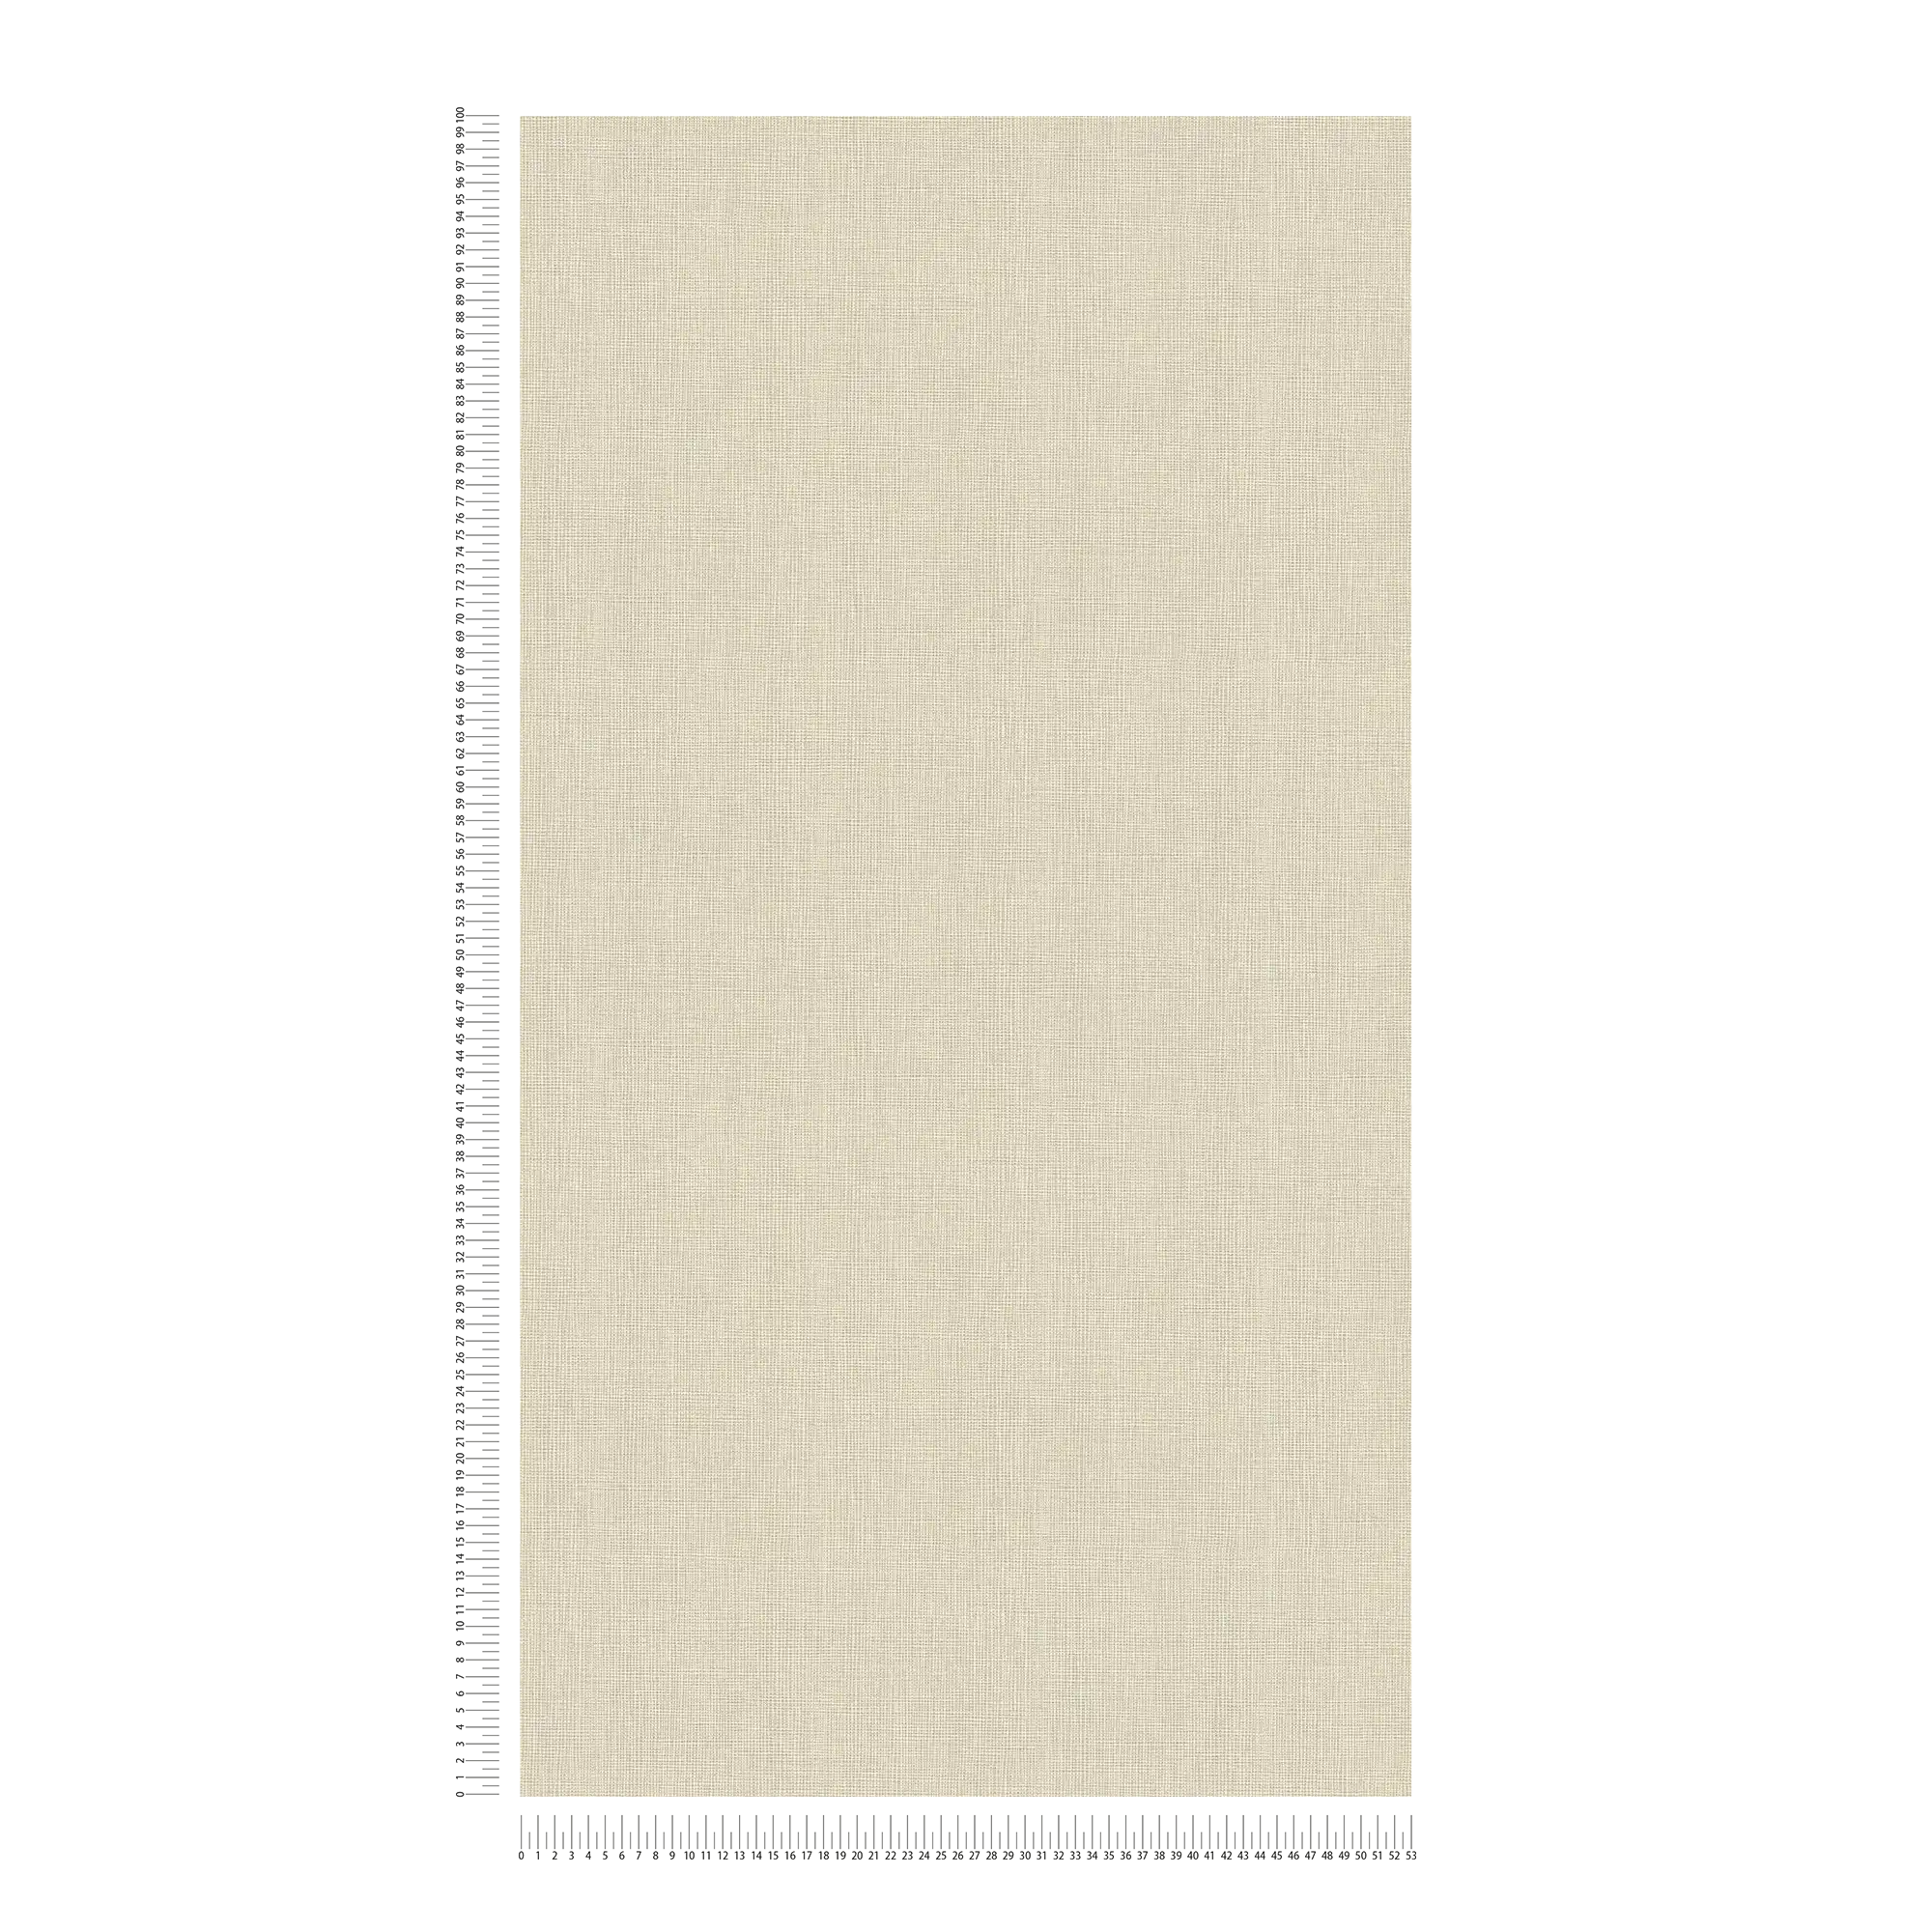             Plain non-woven wallpaper beige with textile fabric pattern
        